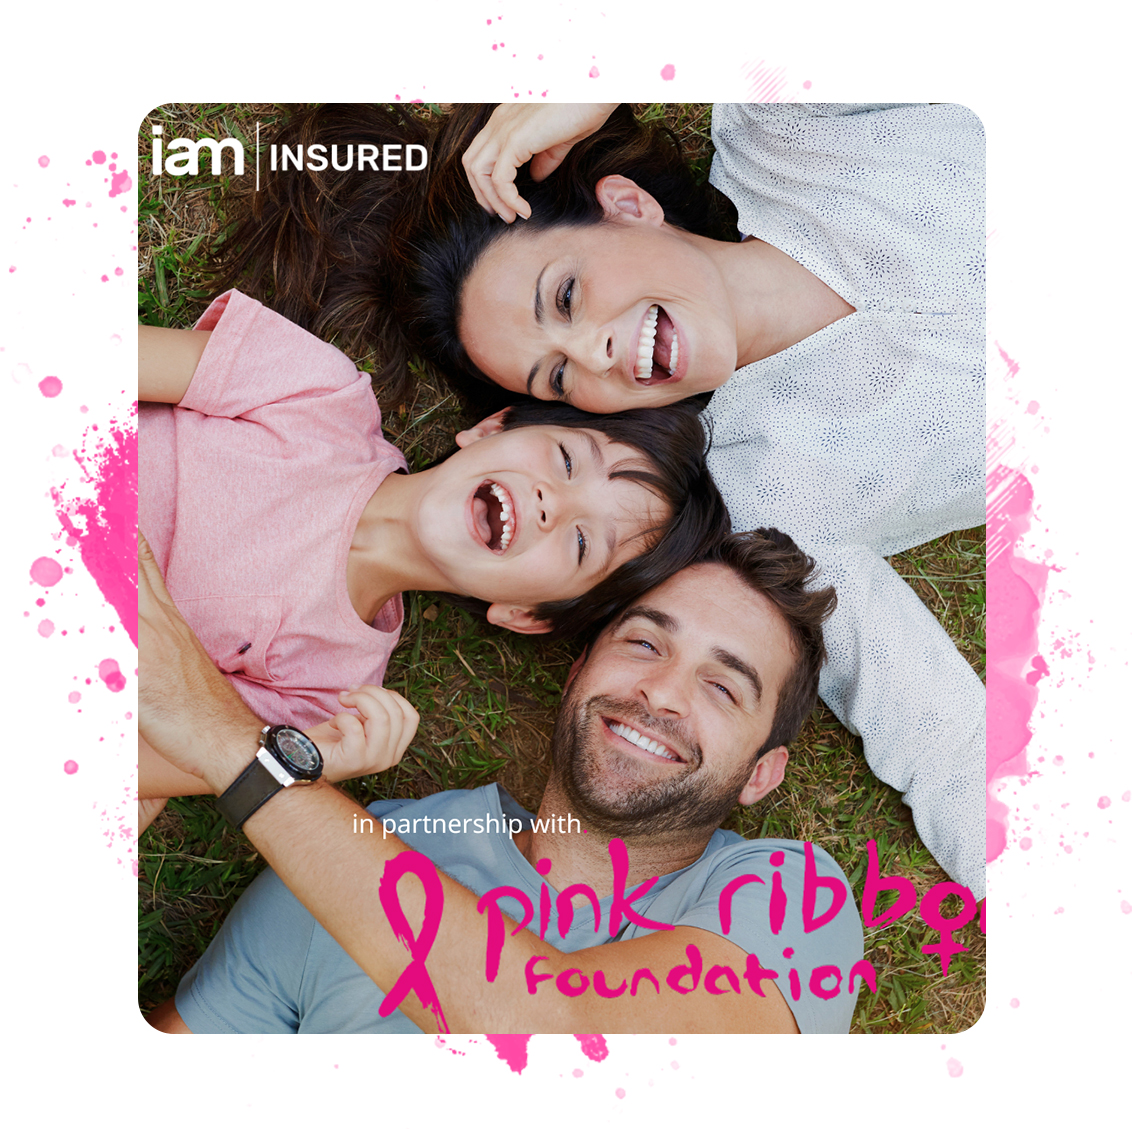 Breast Cancer Life Insurance